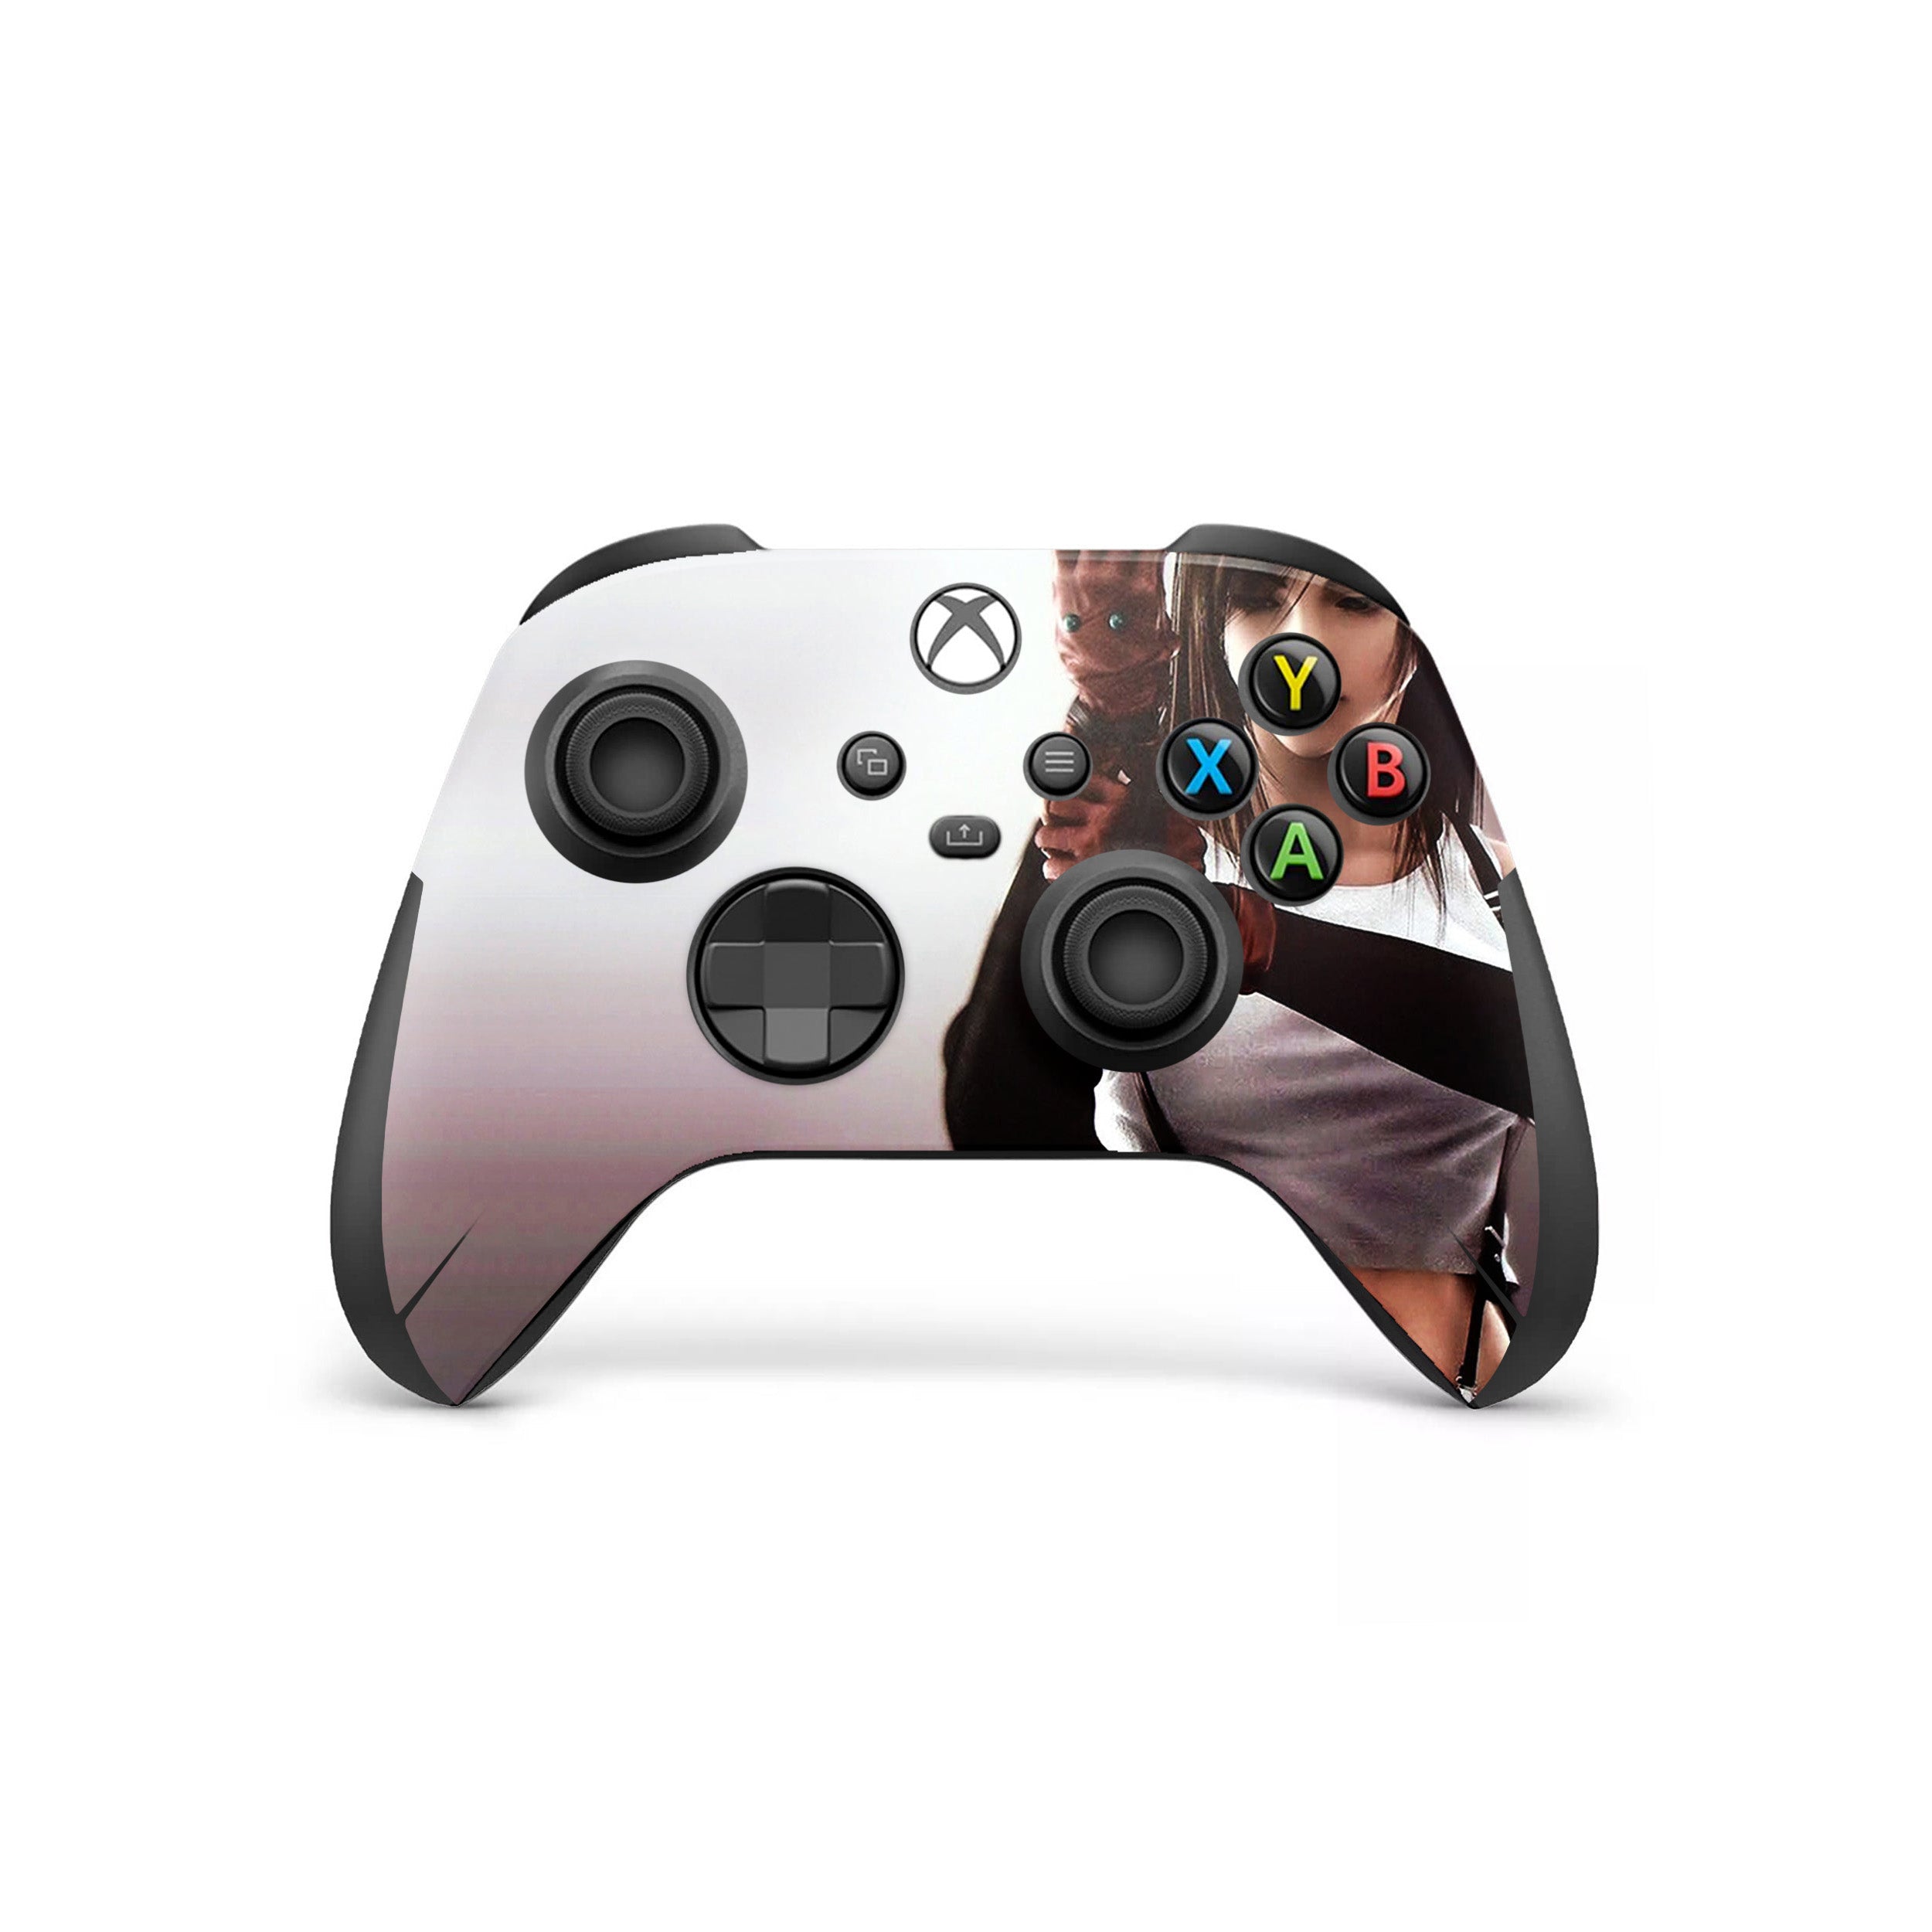 A video game skin featuring a Final Fantasy 7 Tifa design for the Xbox Wireless Controller.